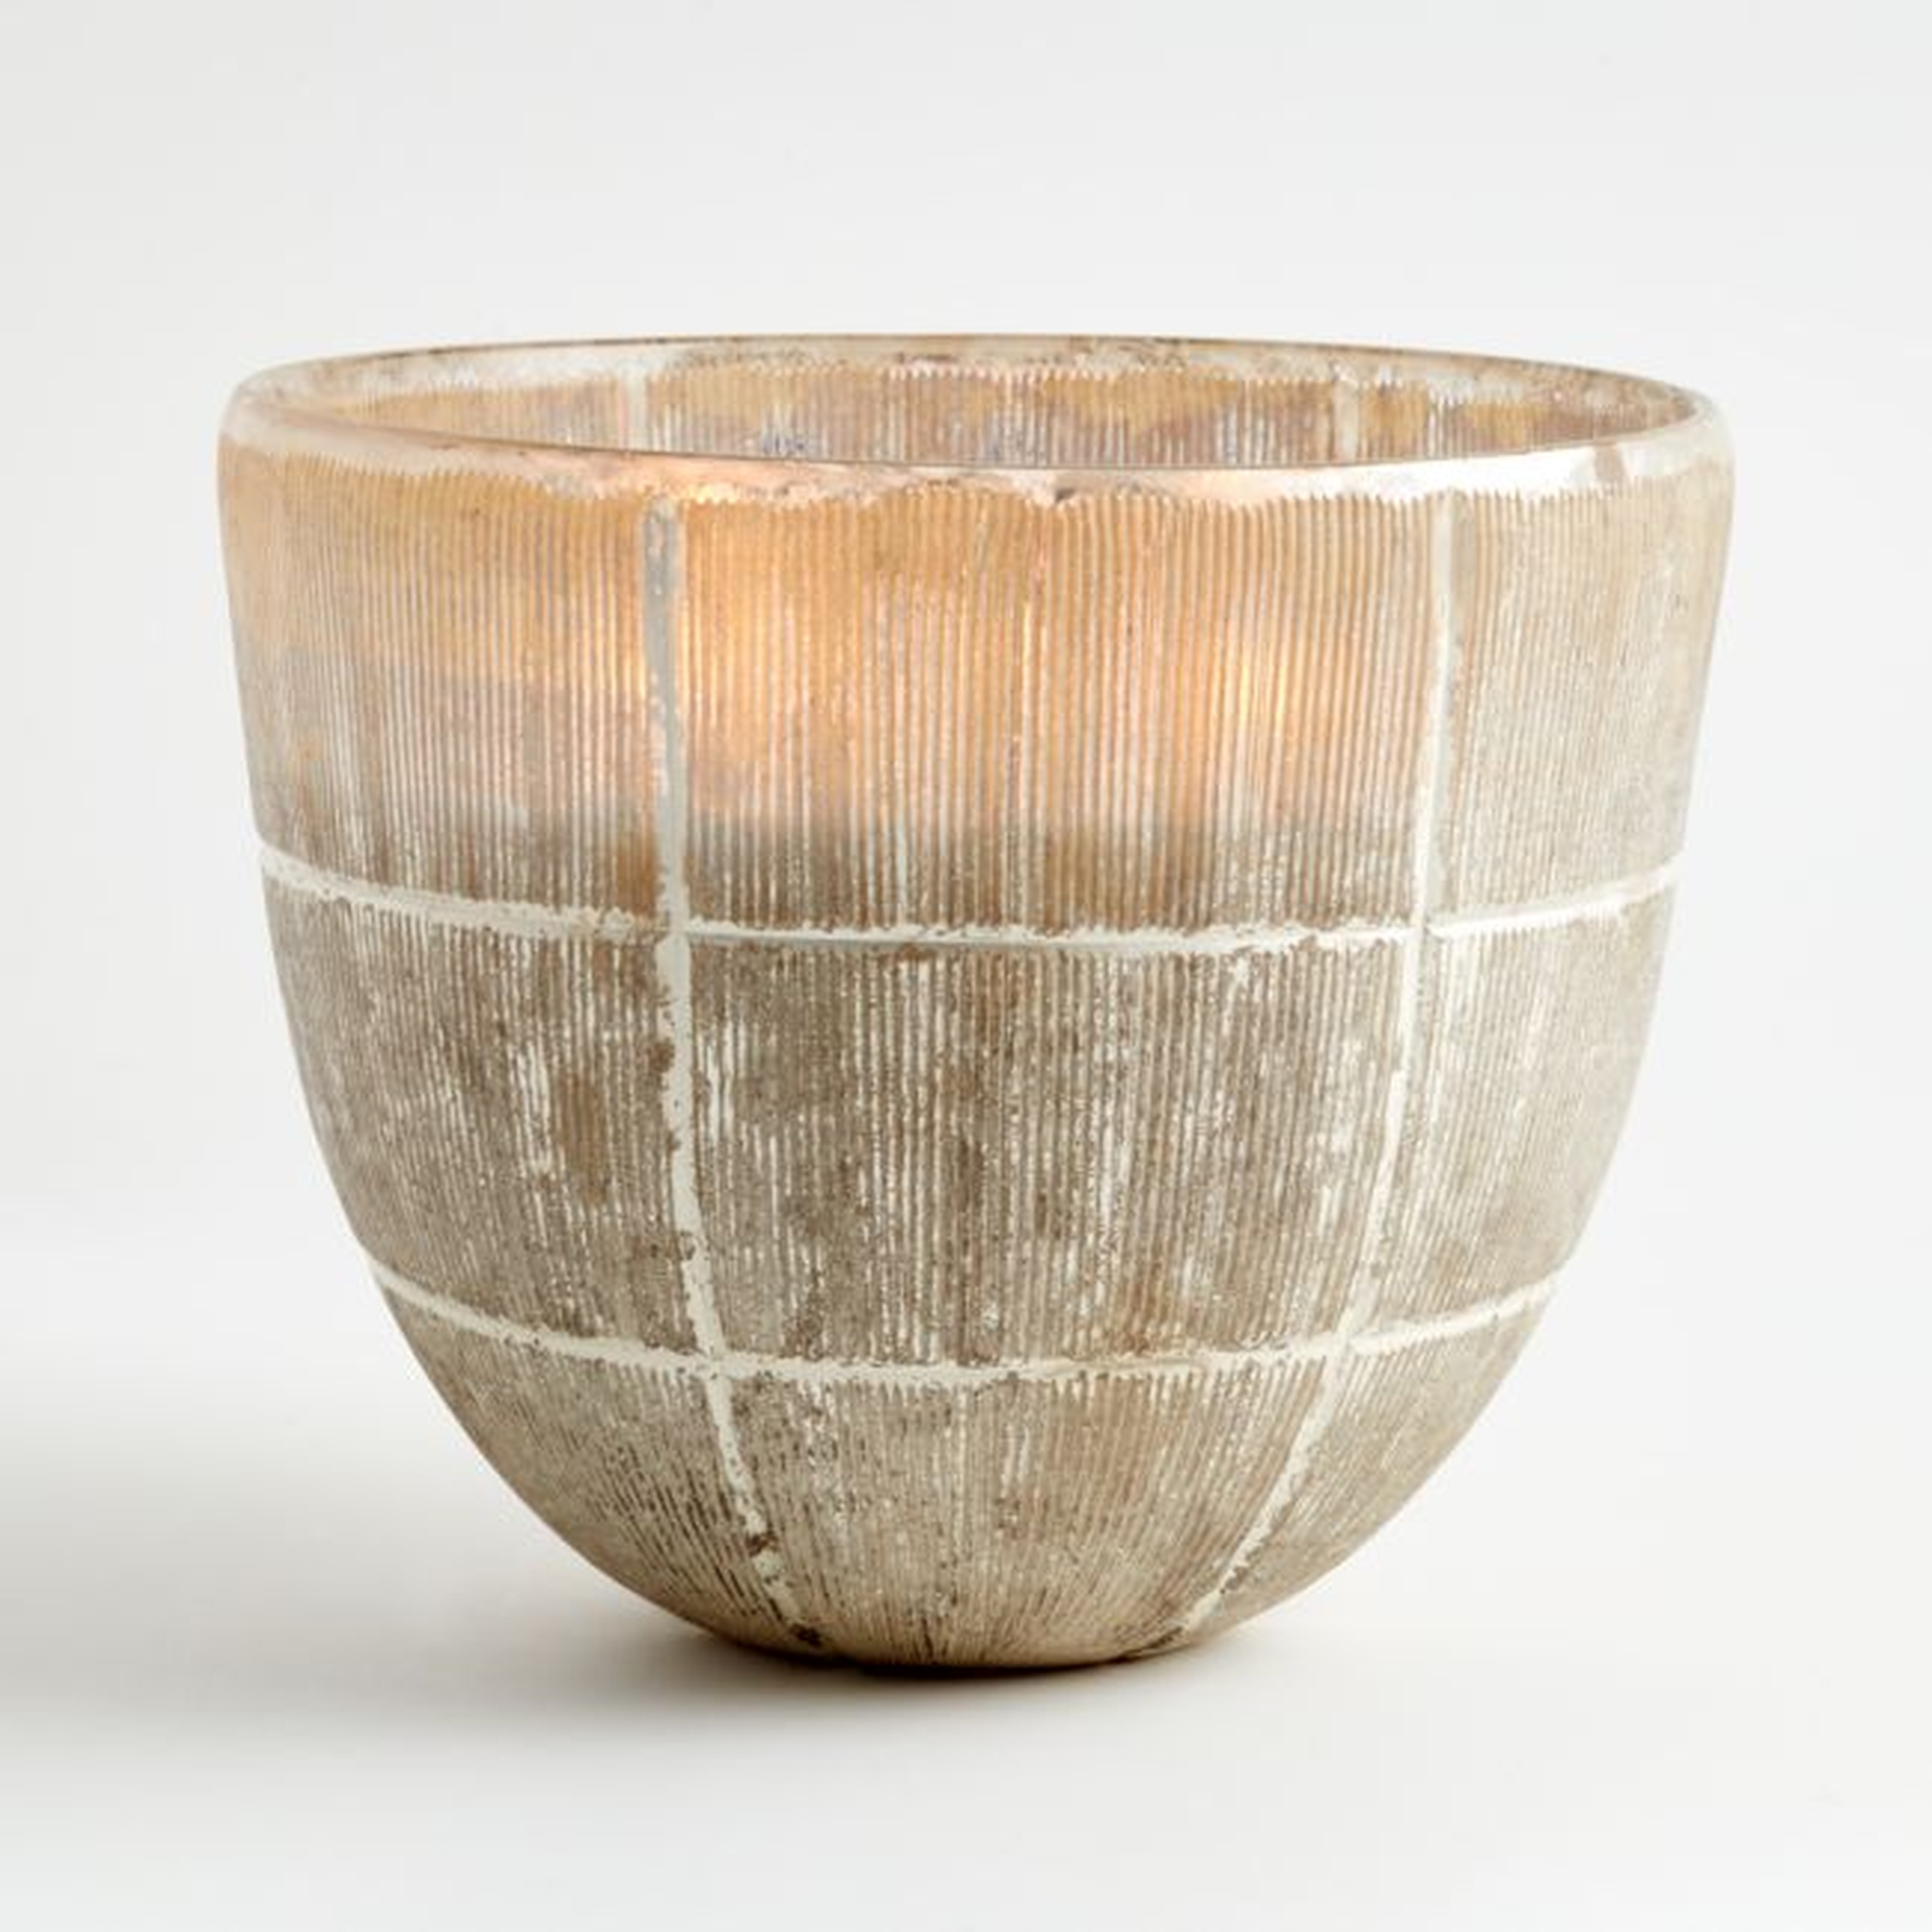 Etched Silver Candle Pot - Crate and Barrel